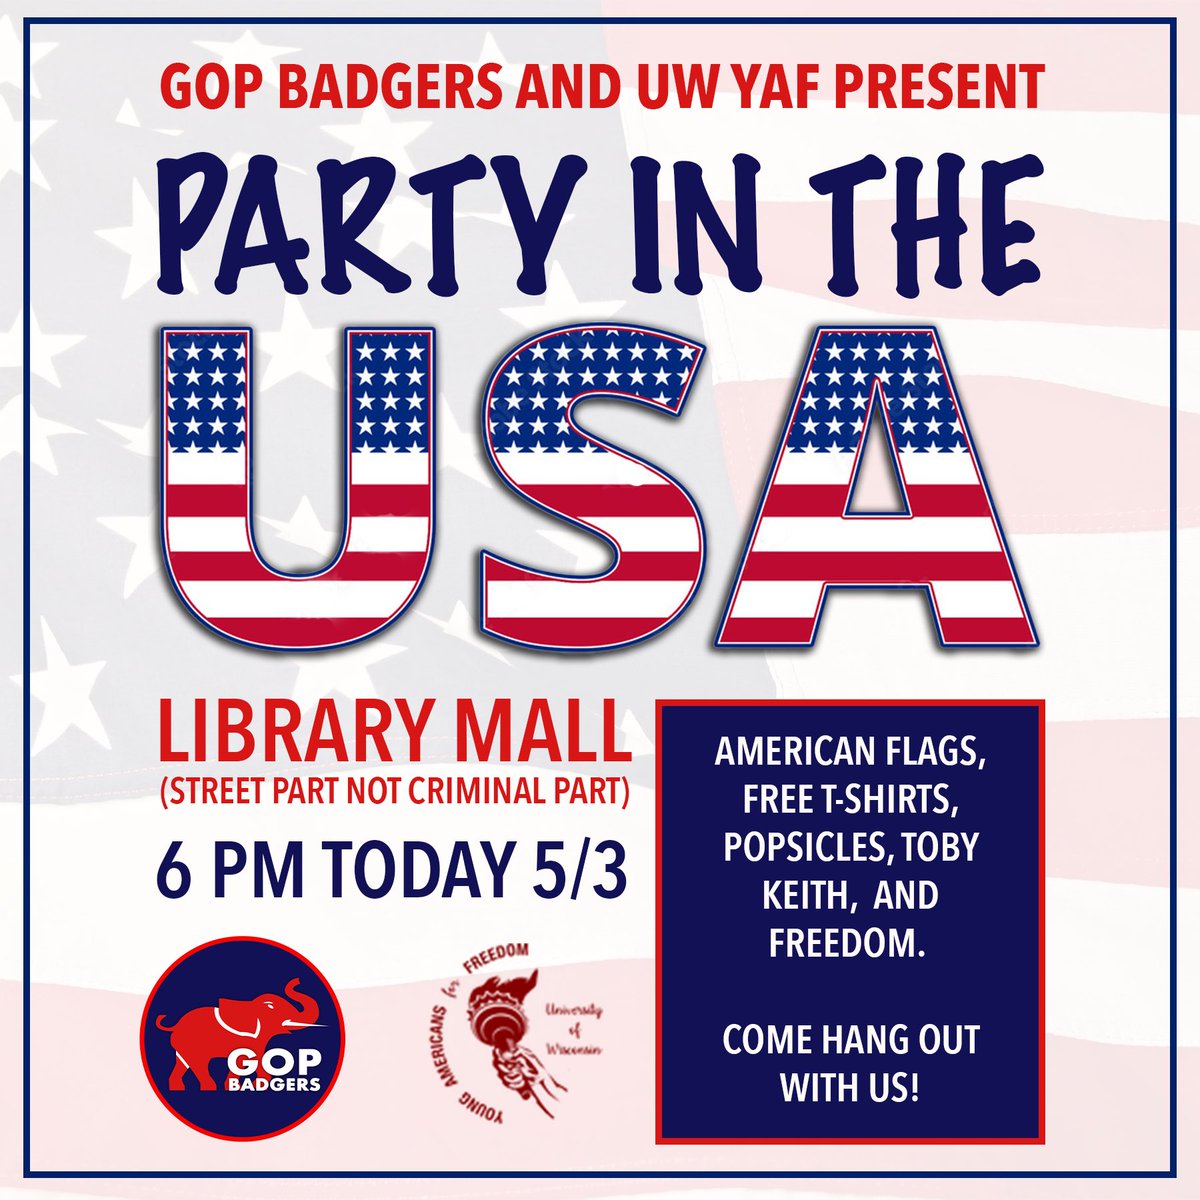 Come hang out with us on Library Mall to celebrate everything that makes America great! We'll have free t shirts, American flags, pocket constitutions, and popsicles!